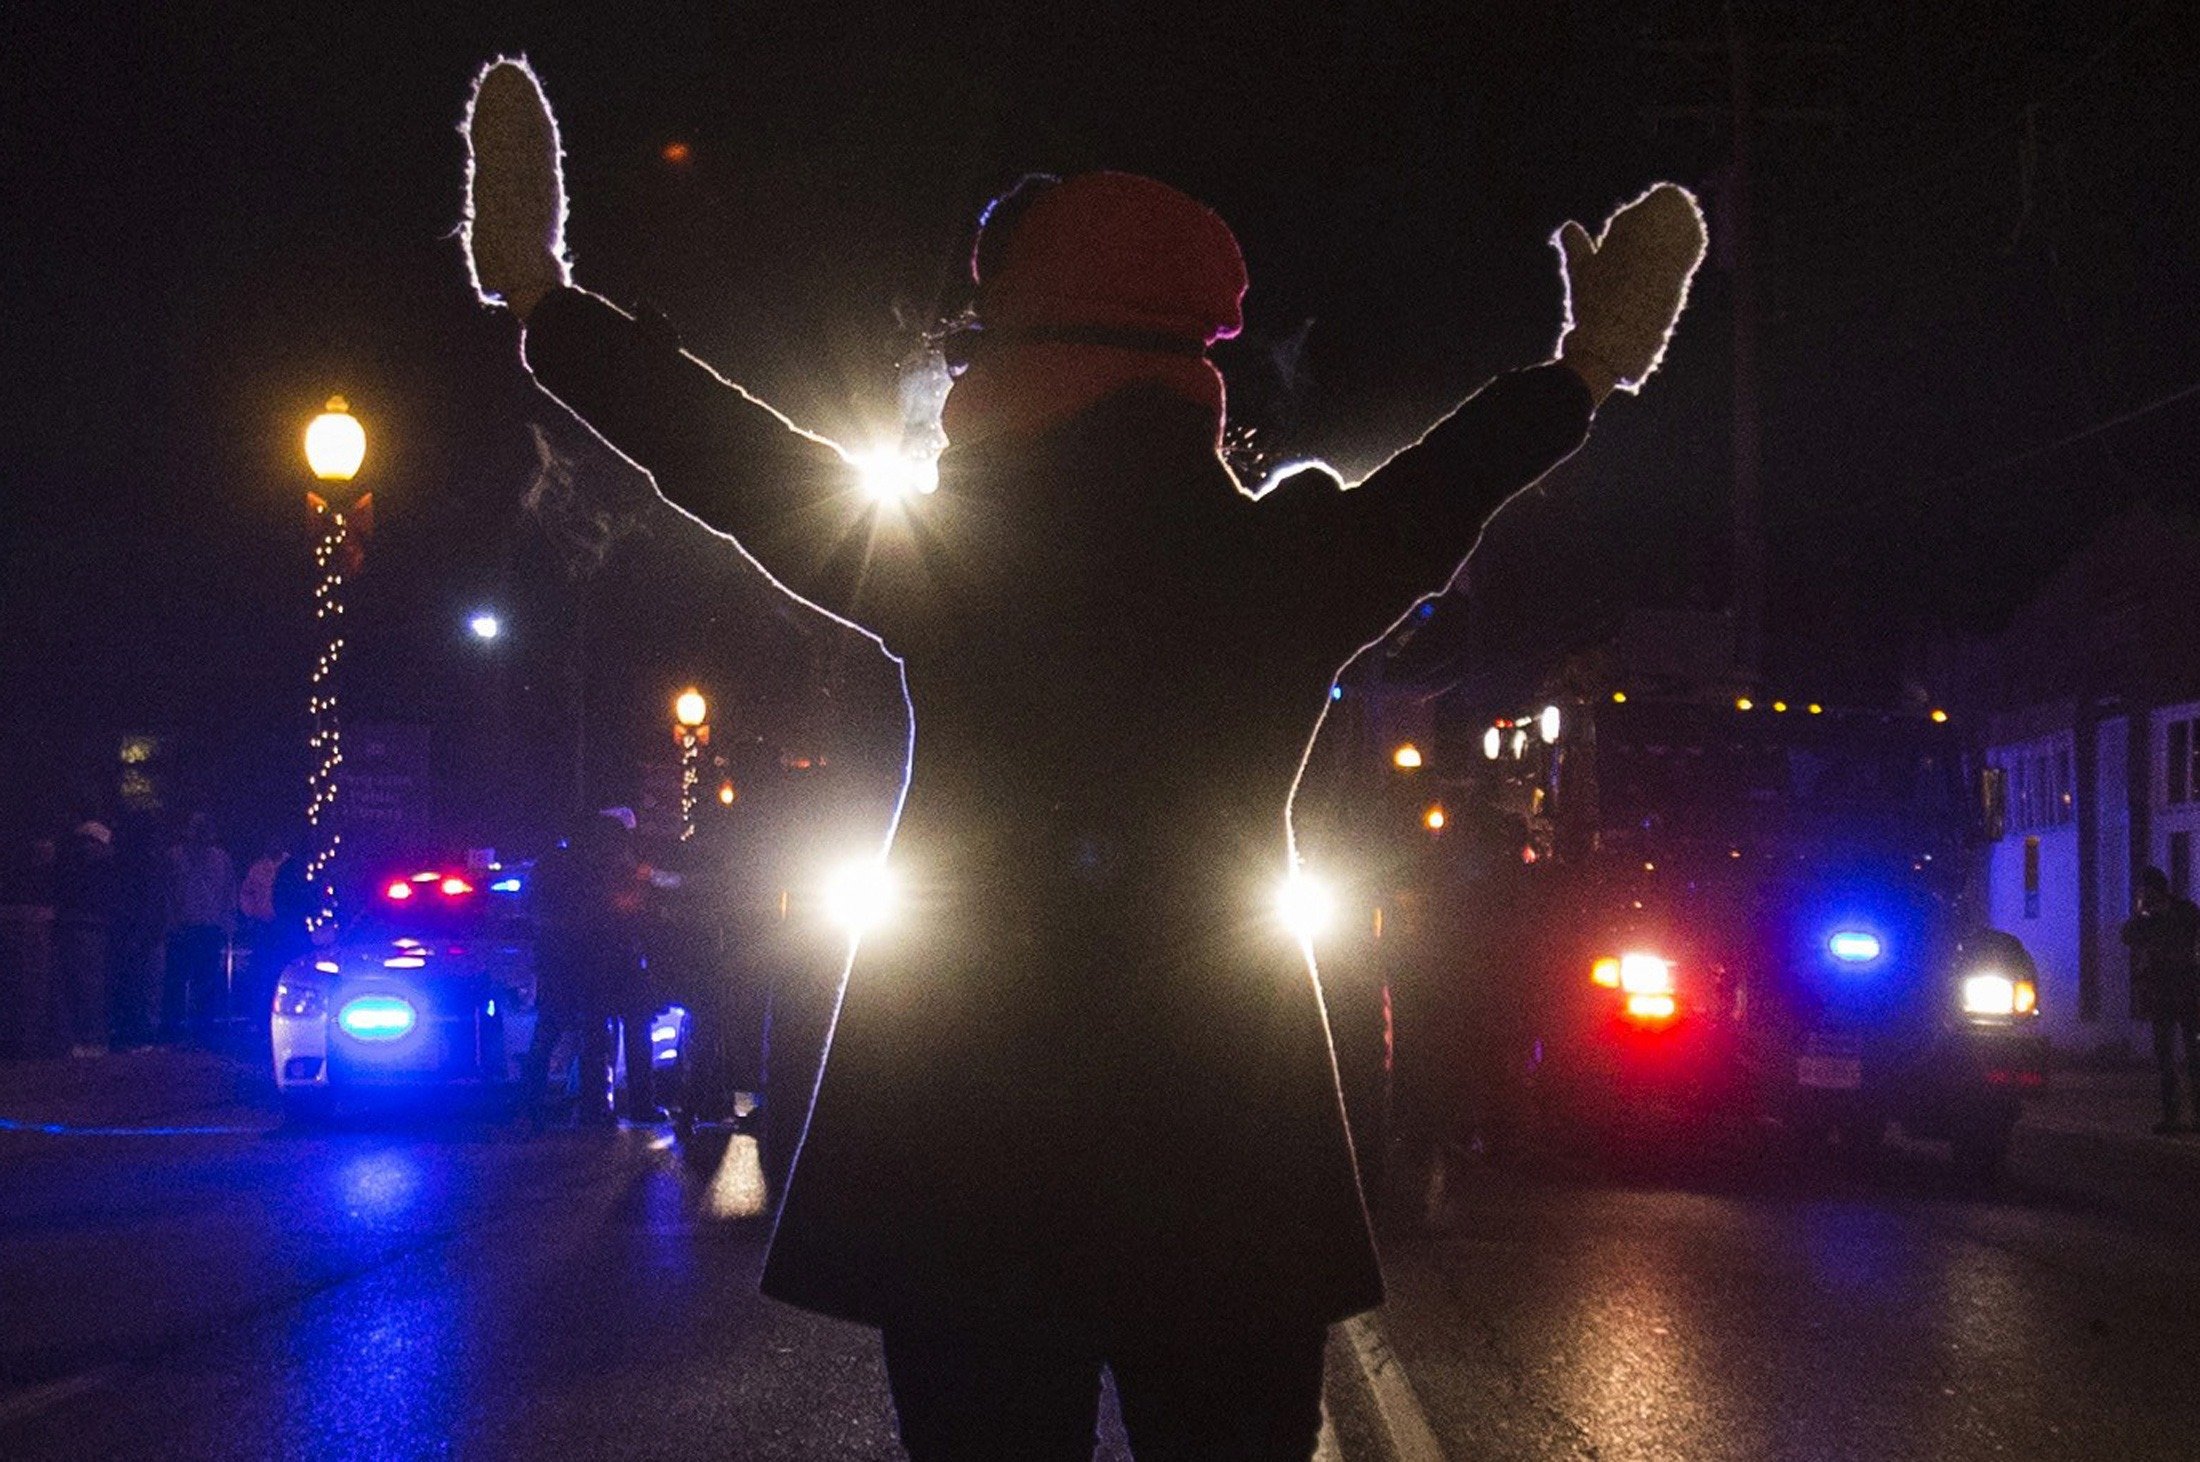 A female protester raises her hands while blocking police cars in Ferguson, Mo. on Nov. 25, 2014. (Adrees Latif—Reuters)